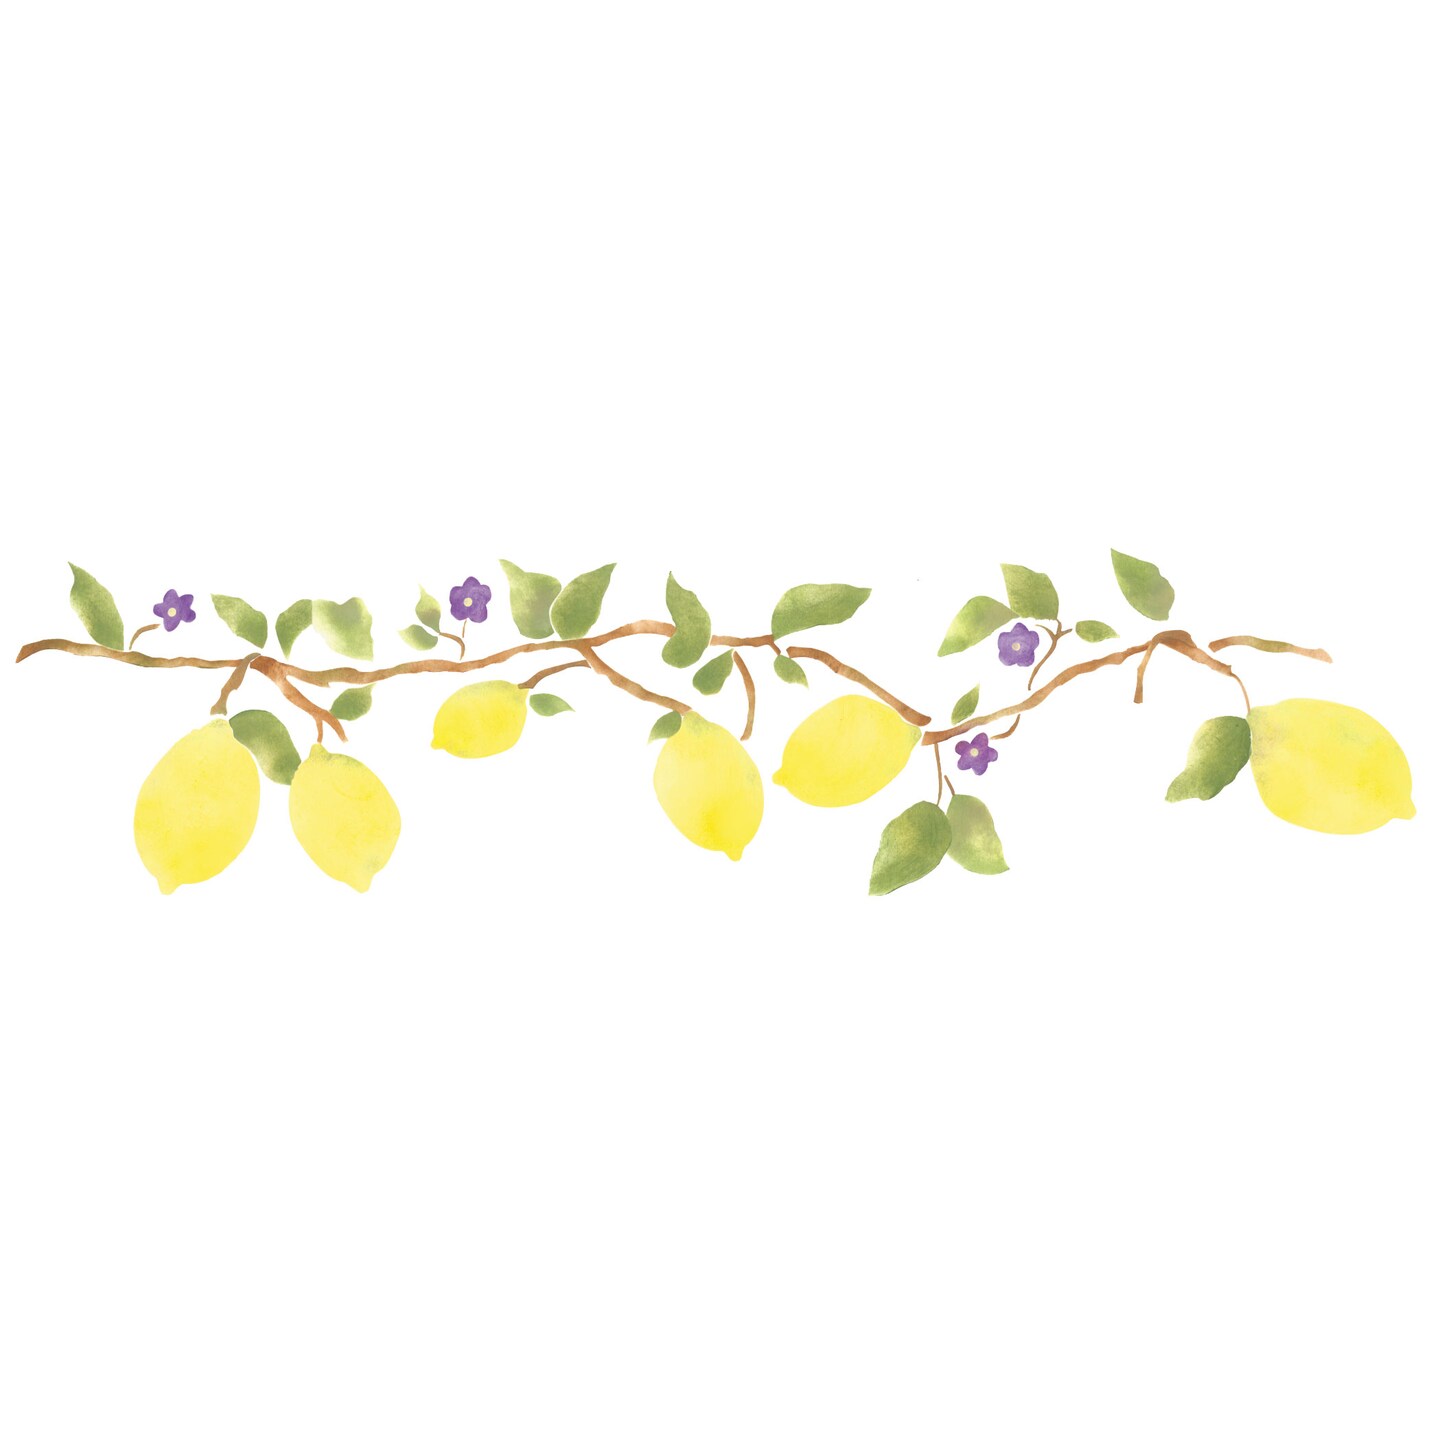 Lemon Branch Wall Stencil Border | 3274 by Designer Stencils | Animal &#x26; Nature Stencils | Reusable Art Craft Stencils for Painting on Walls, Canvas, Wood | Reusable Plastic Paint Stencil for Home Makeover | Easy to Use &#x26; Clean Art Stencil